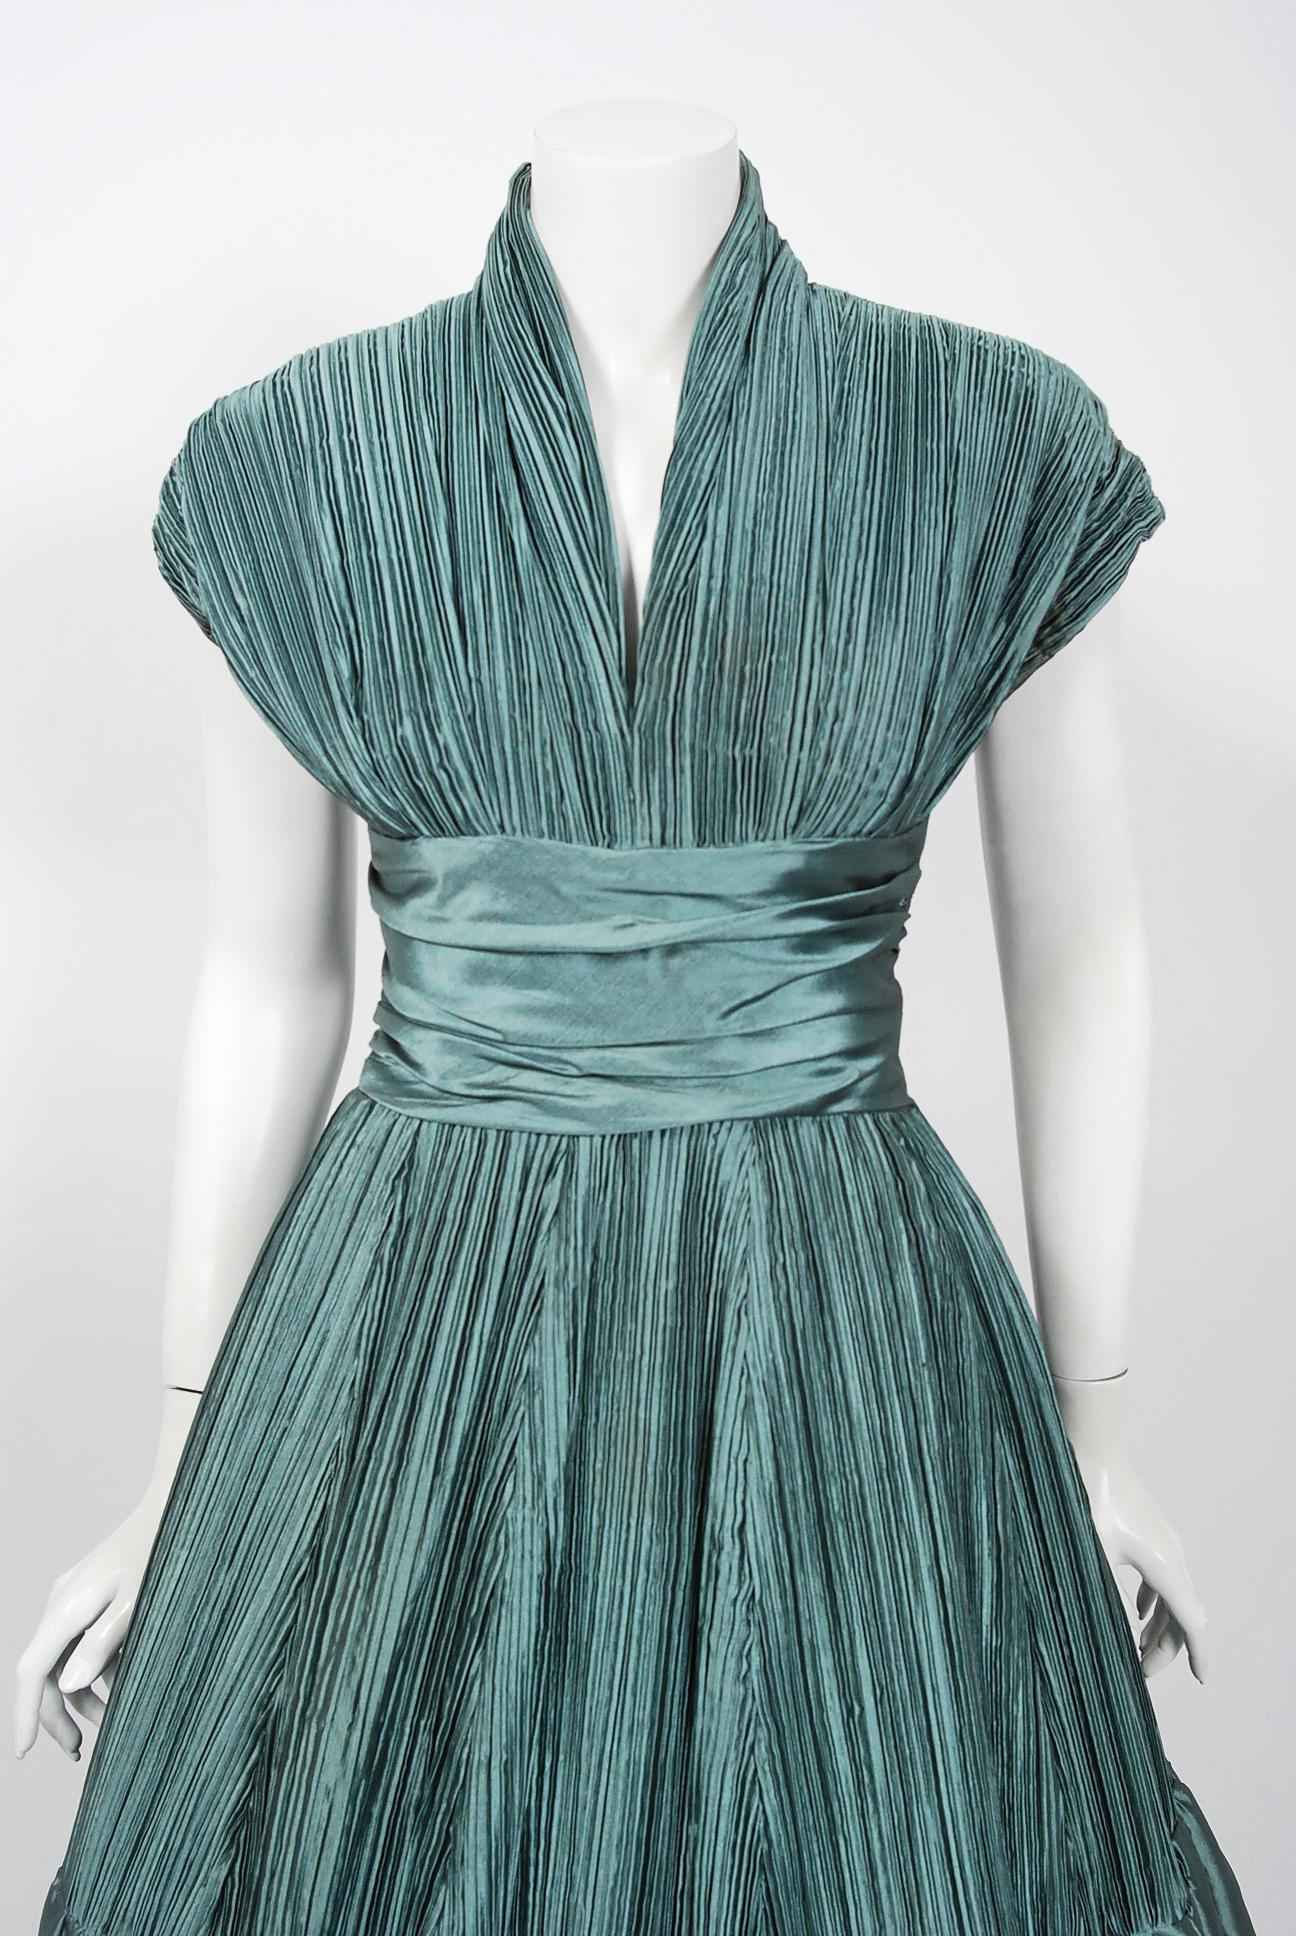 Fashioned from vibrant teal blue light-weight silk, this 1950's 